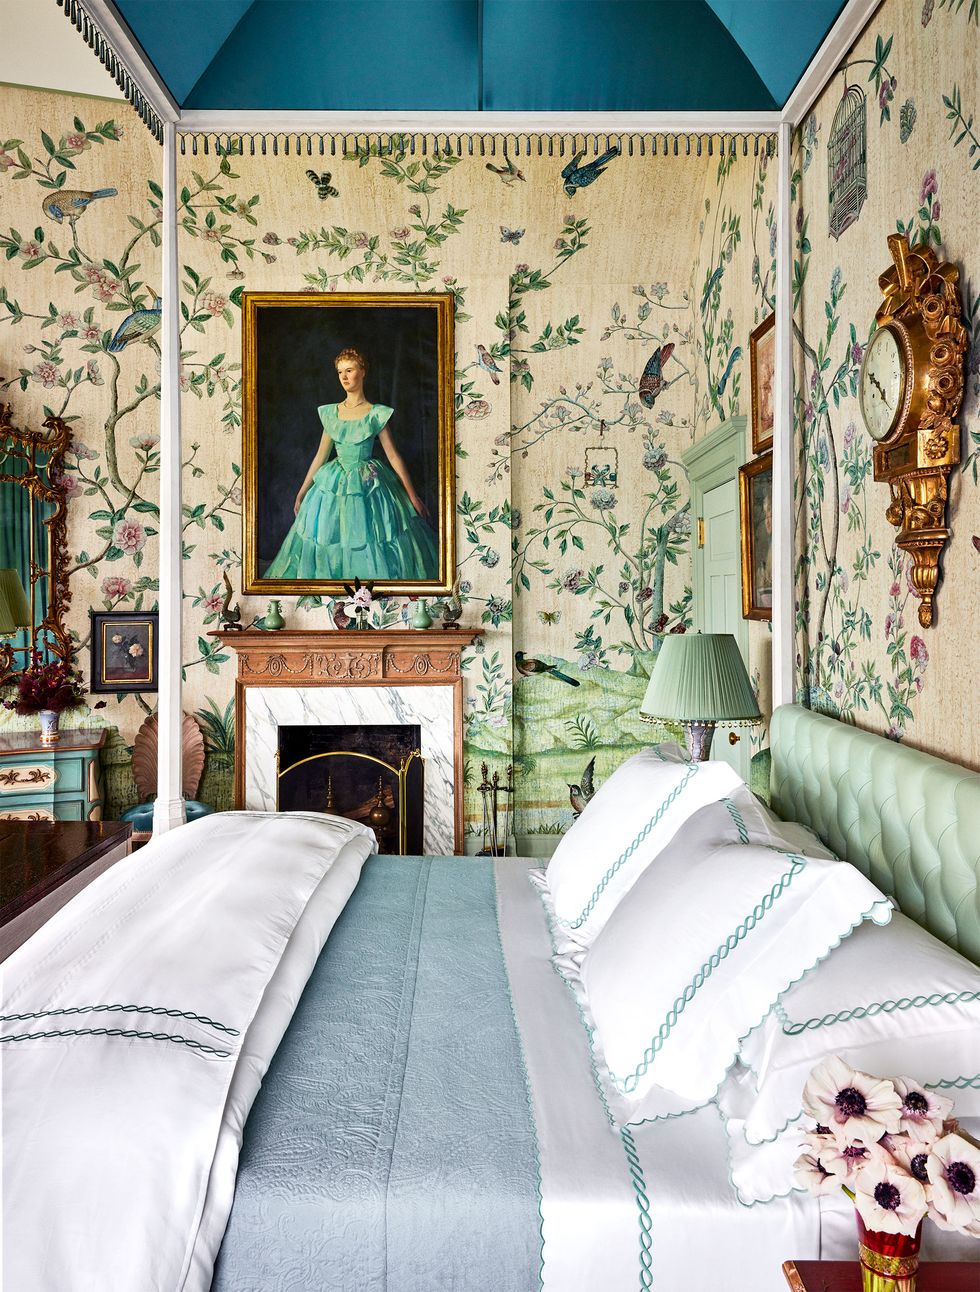 The bedroom has vine floral wallpaper with birds on it, a small fireplace, above which is a portrait of a young girl in a green skirt, and the bed has a tufted light green headboard. There is a matching pleated lamp next to it, with starched white linen.The bed has a twisted rope design and a light blue comforter.